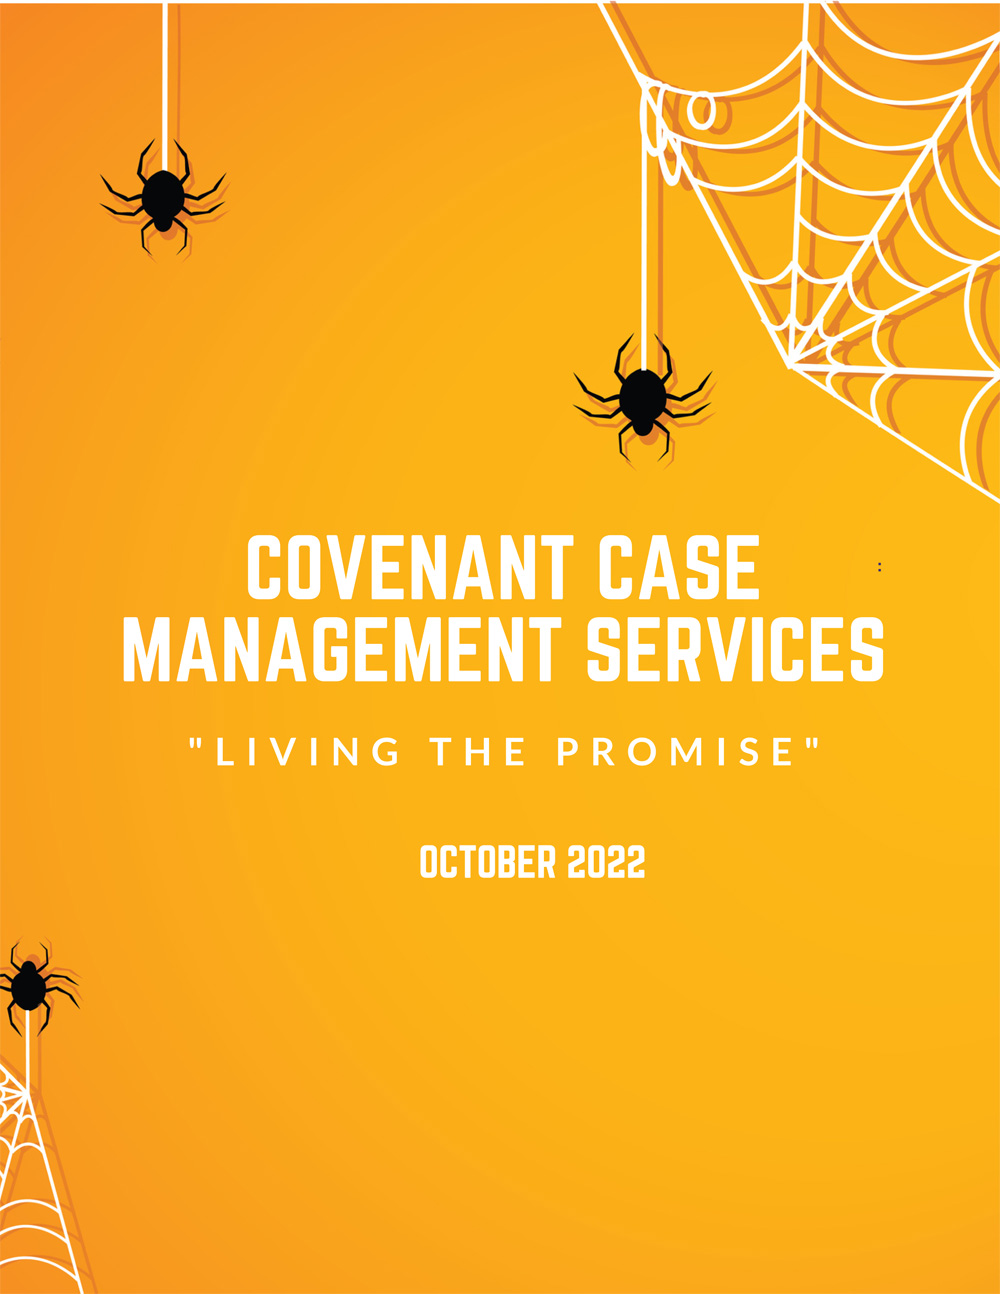 October 2022 Newsletter from Covenant Case Management Services